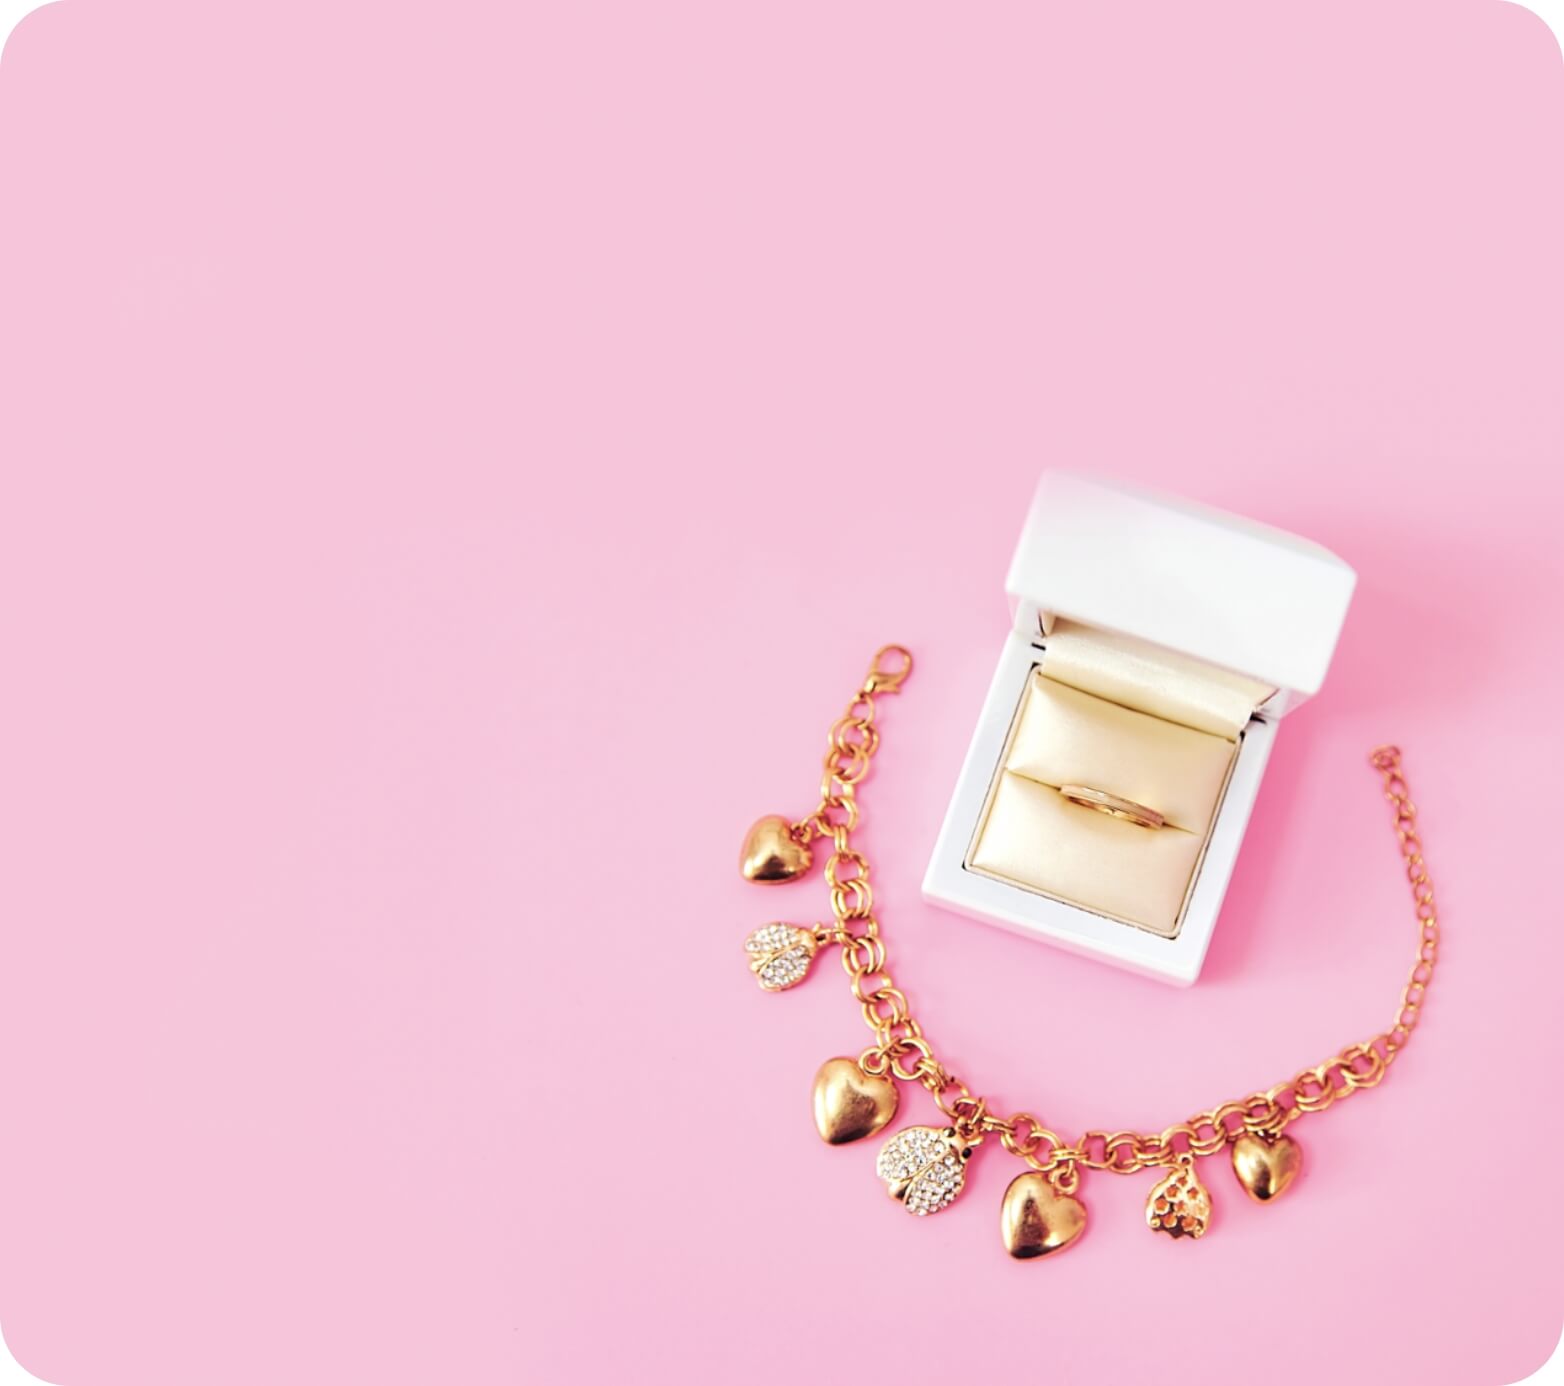 A golden heart charm bracelet and a ring in a white jewelry box, both placed on a pink background